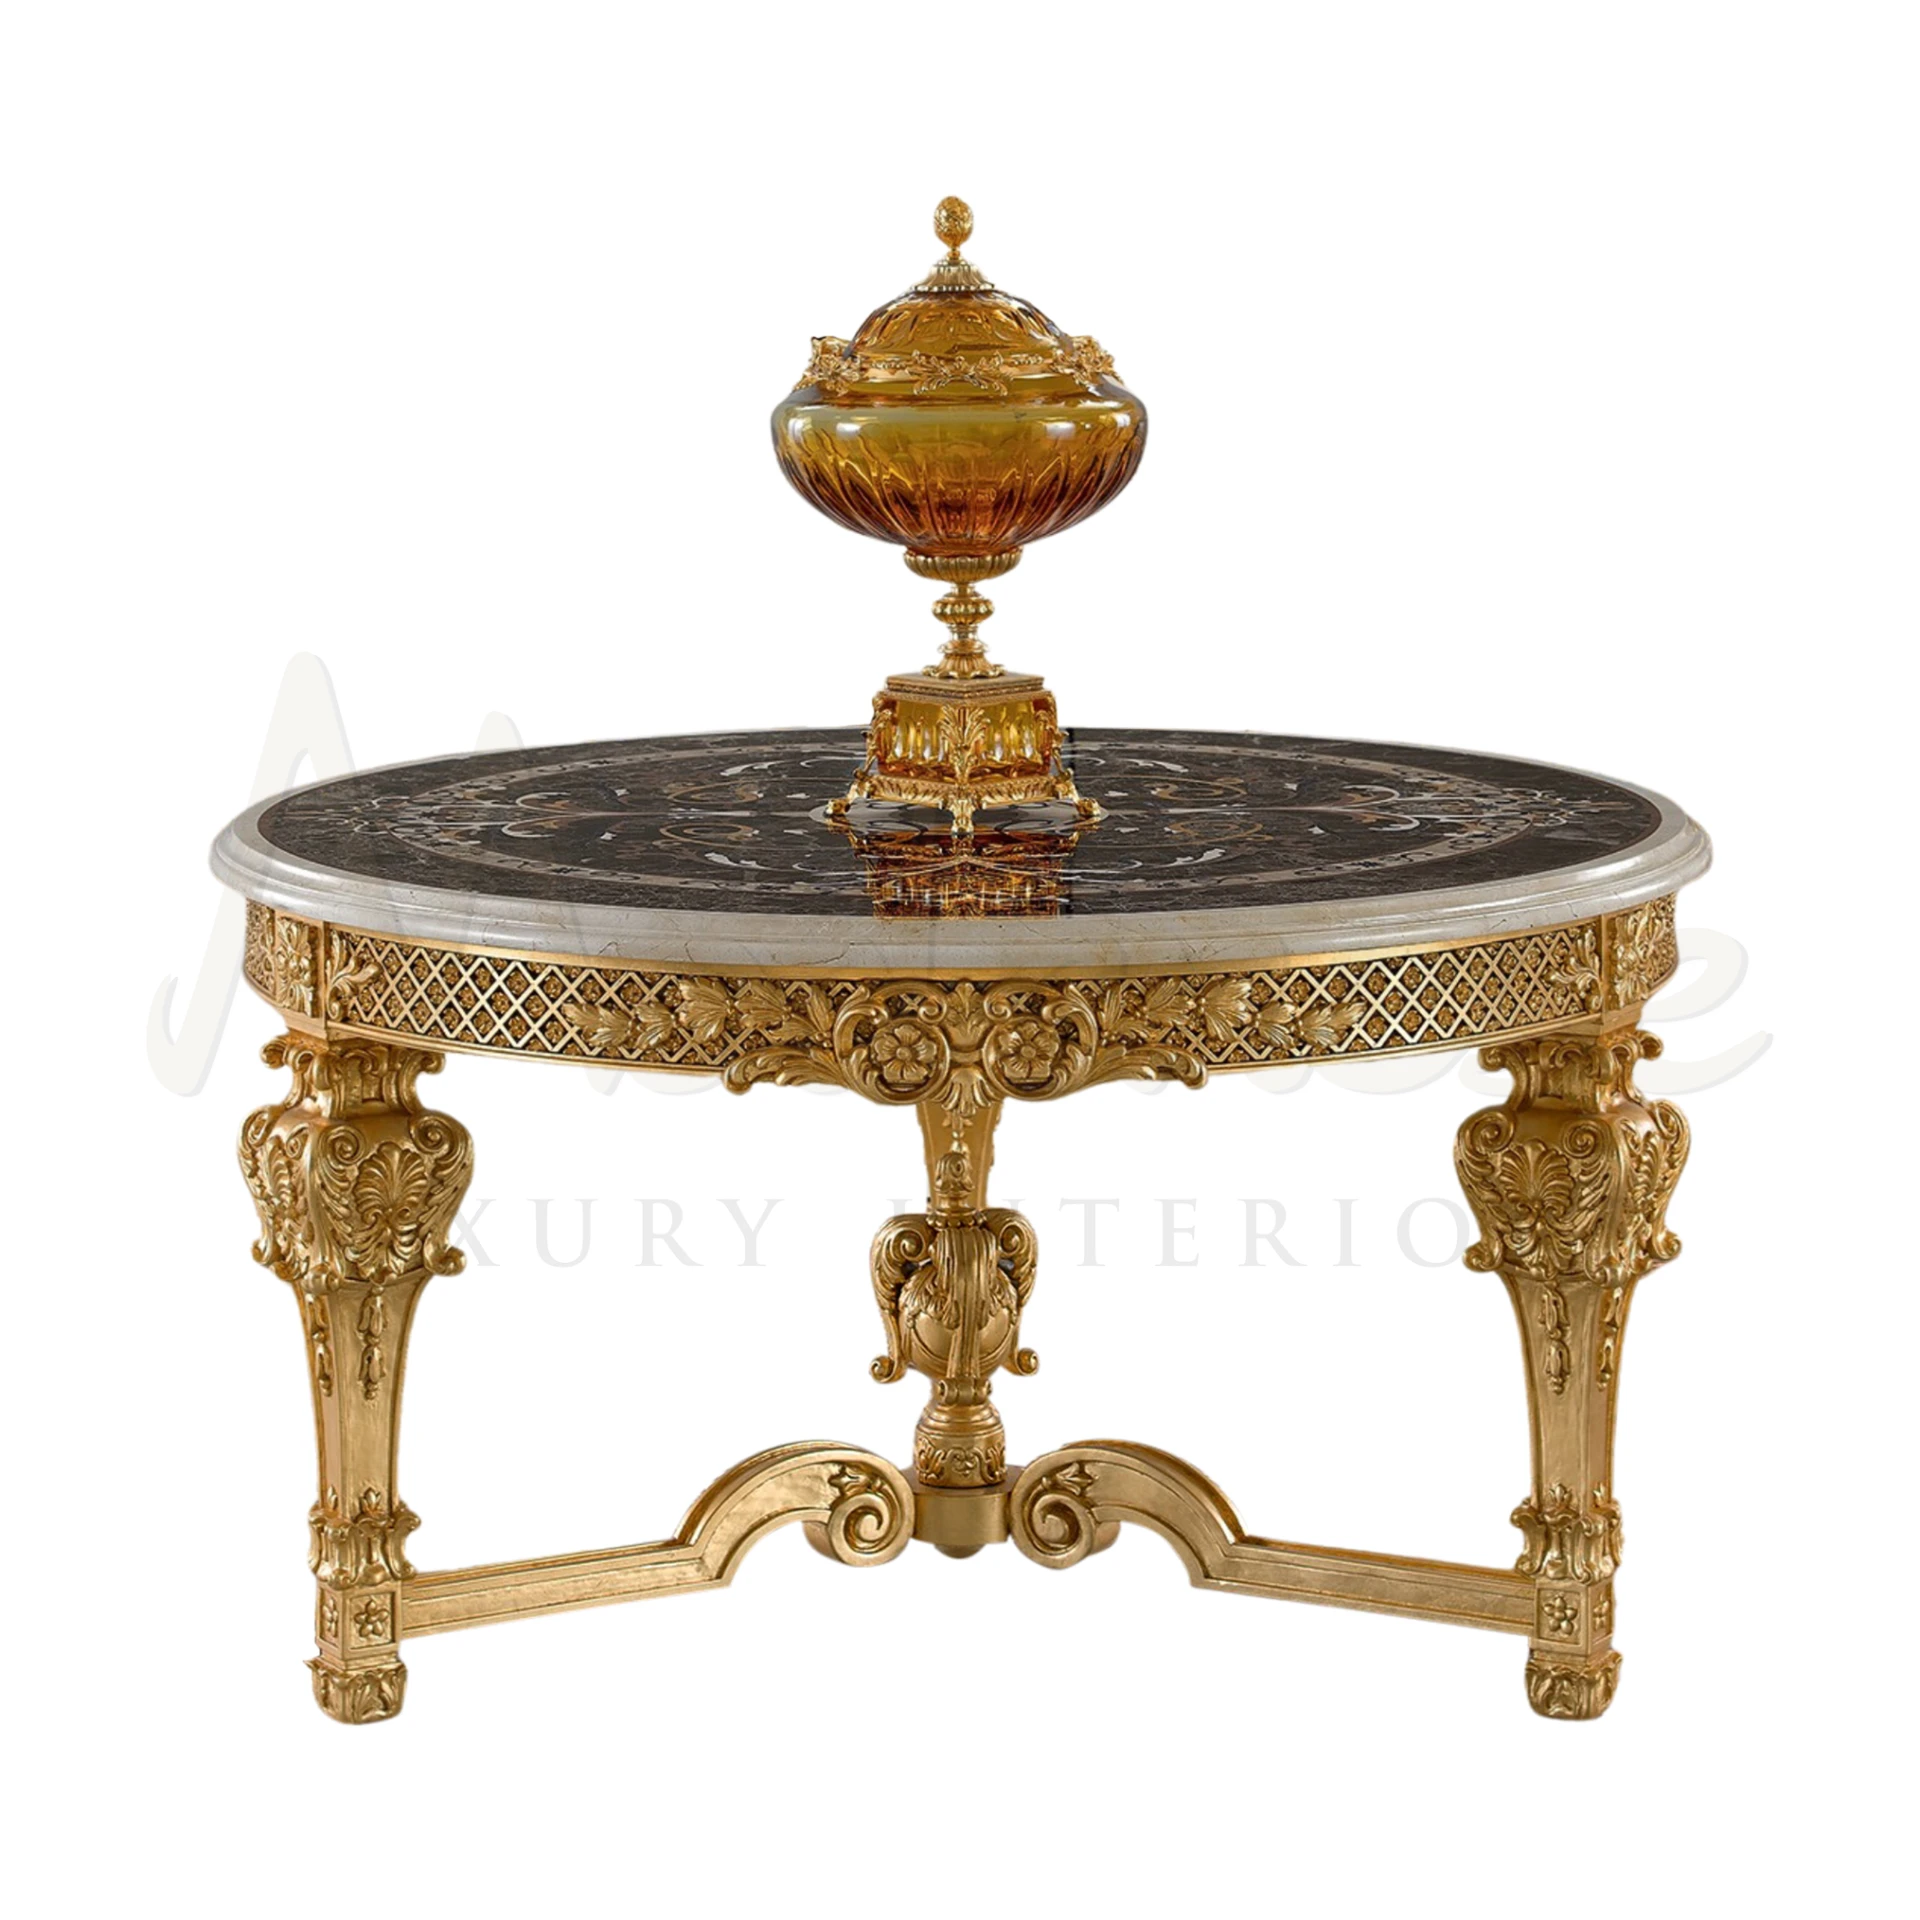 "Luxurious Royal Baroque Central Table with intricate gold leaf carving and marble top, reflecting Italian design excellence.